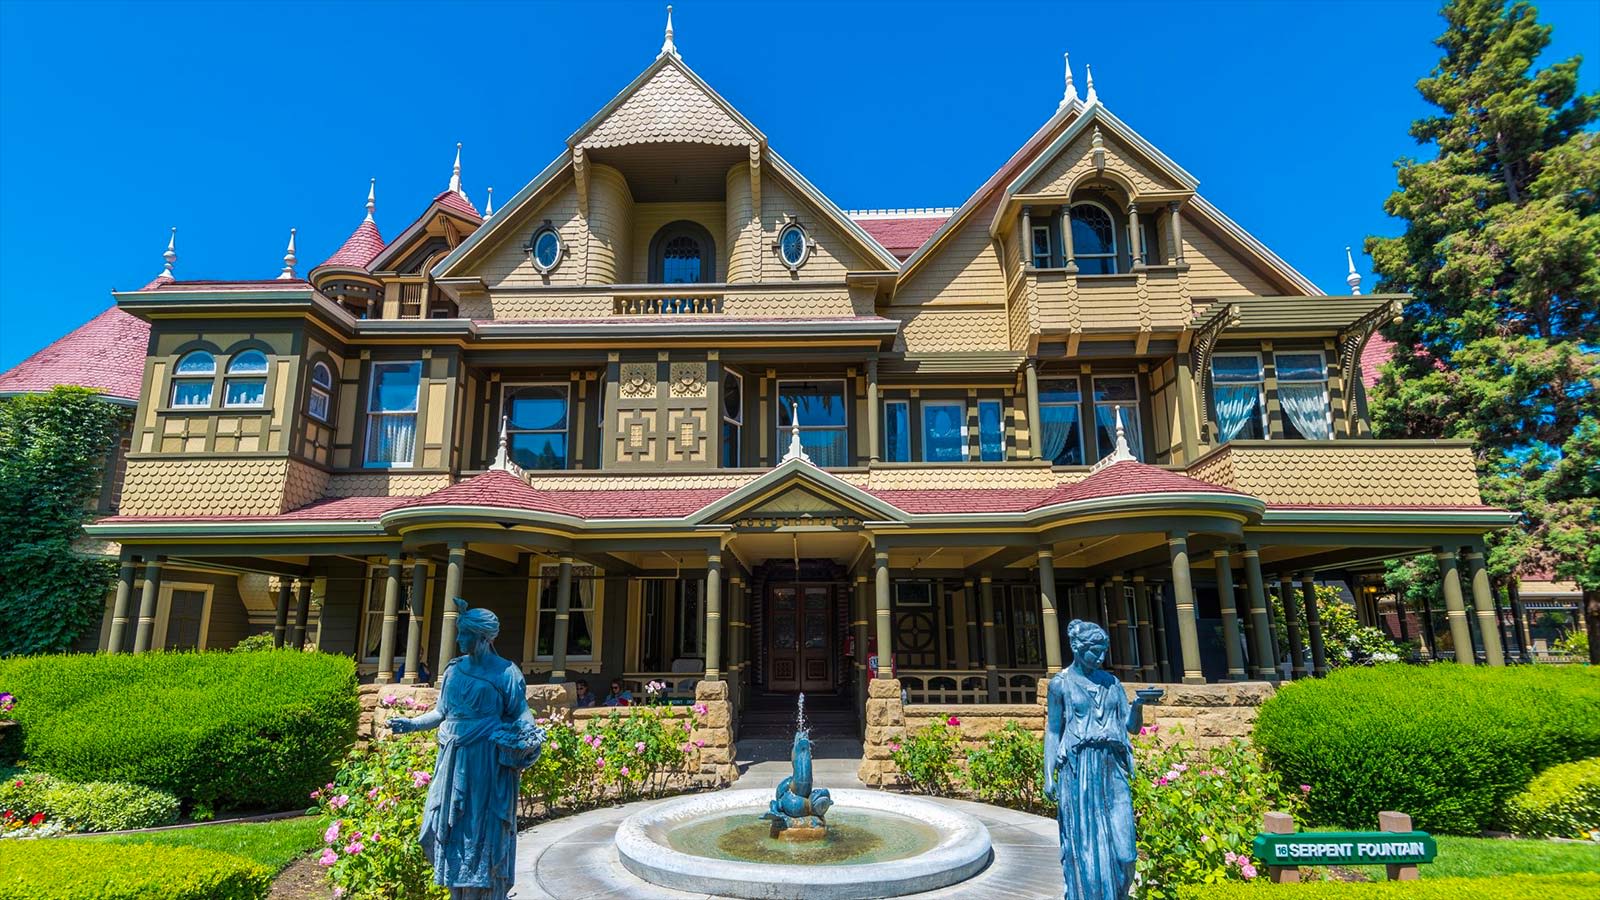 Winchester Mystery House: Dare you uncover its secrets?